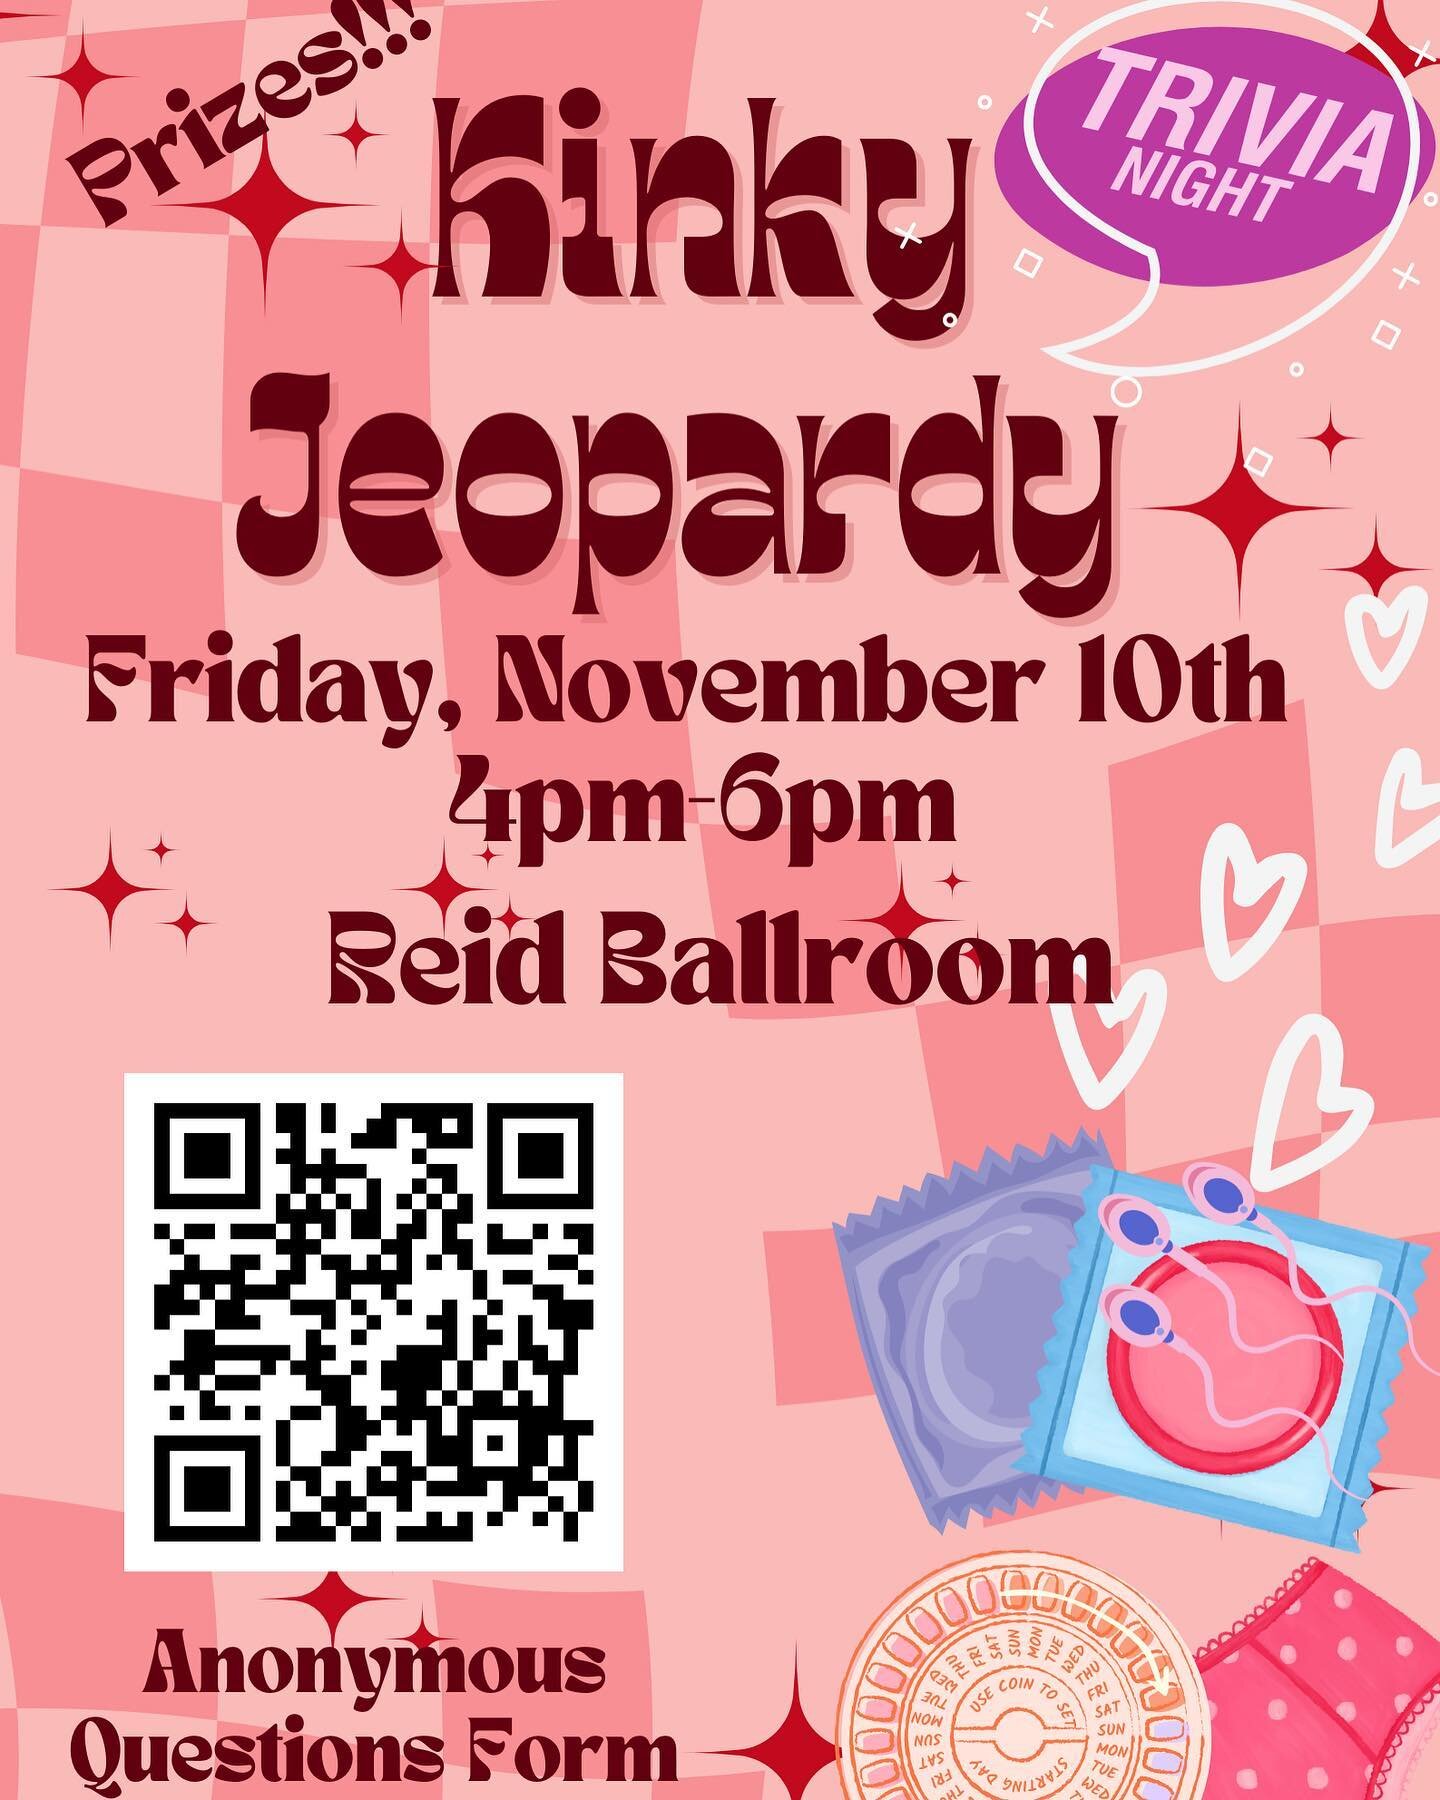 Kinky Jeopardy is happening this Friday! Come to the Reid Ballroom at 4pm for a gamified edition of sex ed. Hosted by Planned Parenthood Generation Action and co-sponsored by WEB &amp; ASWC!!